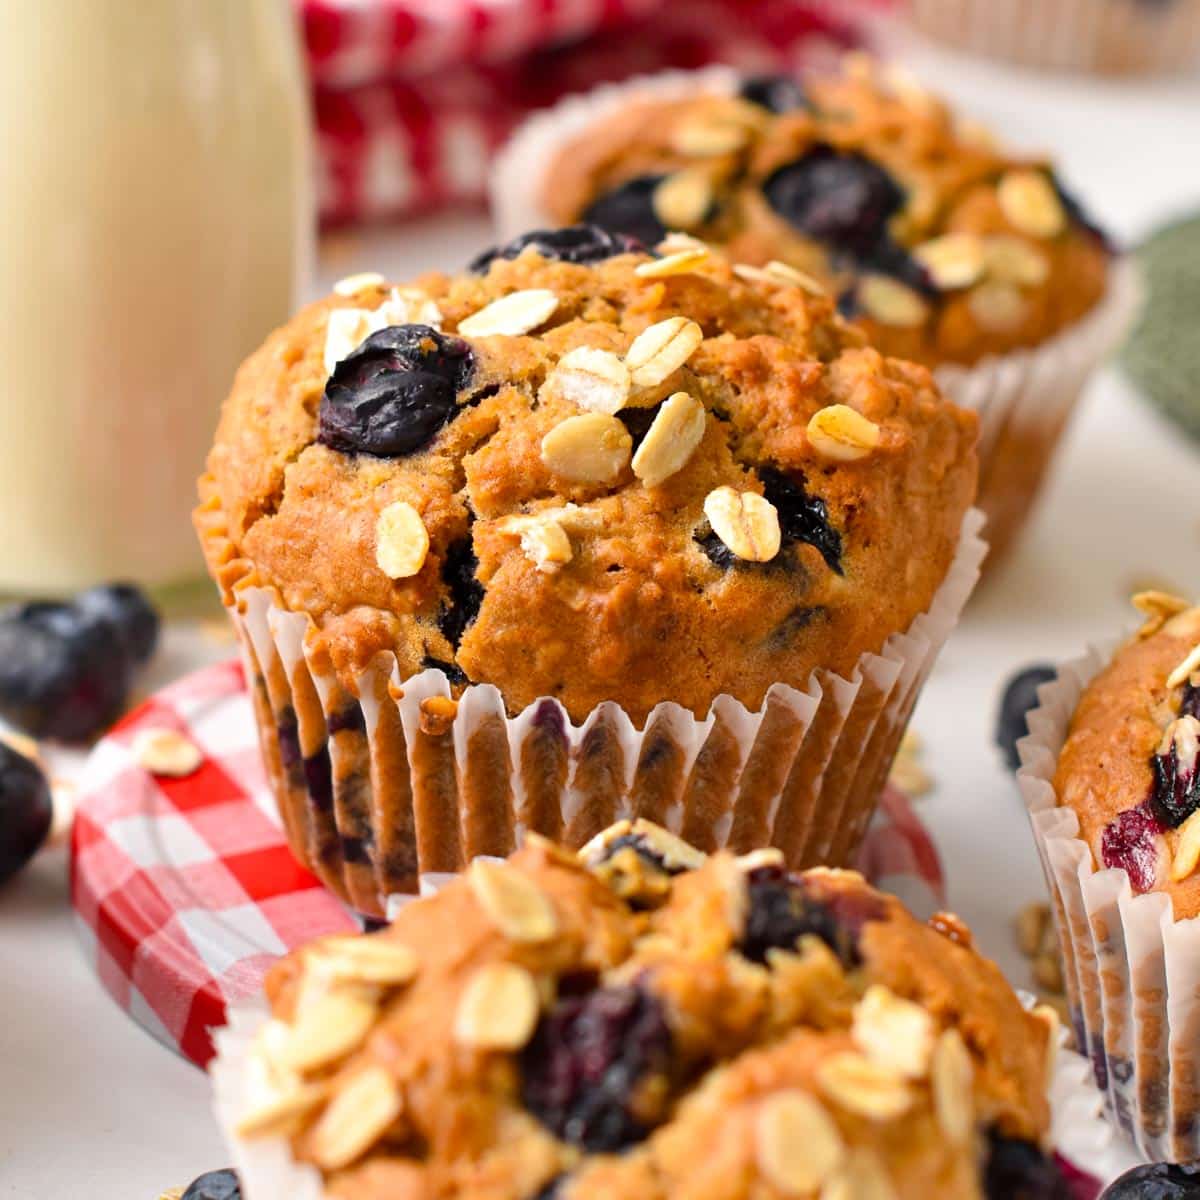 a vegan oatmeal muffin with blueberries,oats on top and placed on red and white round lid